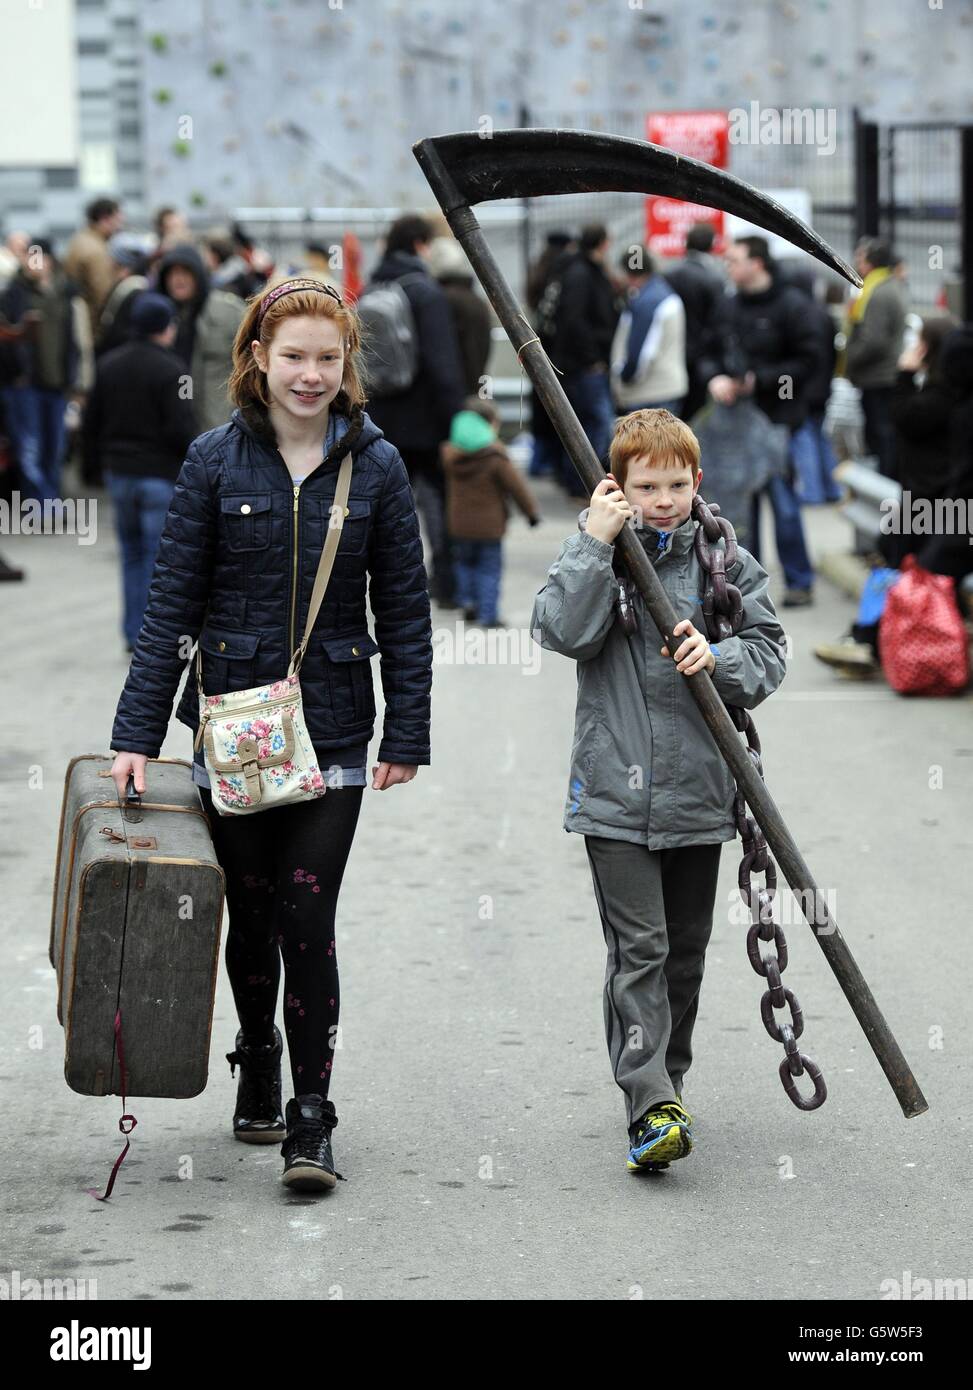 Jessica and Robert Hubery from Buckingham leave with items purchased at the  London Dungeon 'Carnage Car Boot Stall' held at the Capital Car Boot Sale  in Chichester Street, Pimlico, London Stock Photo -